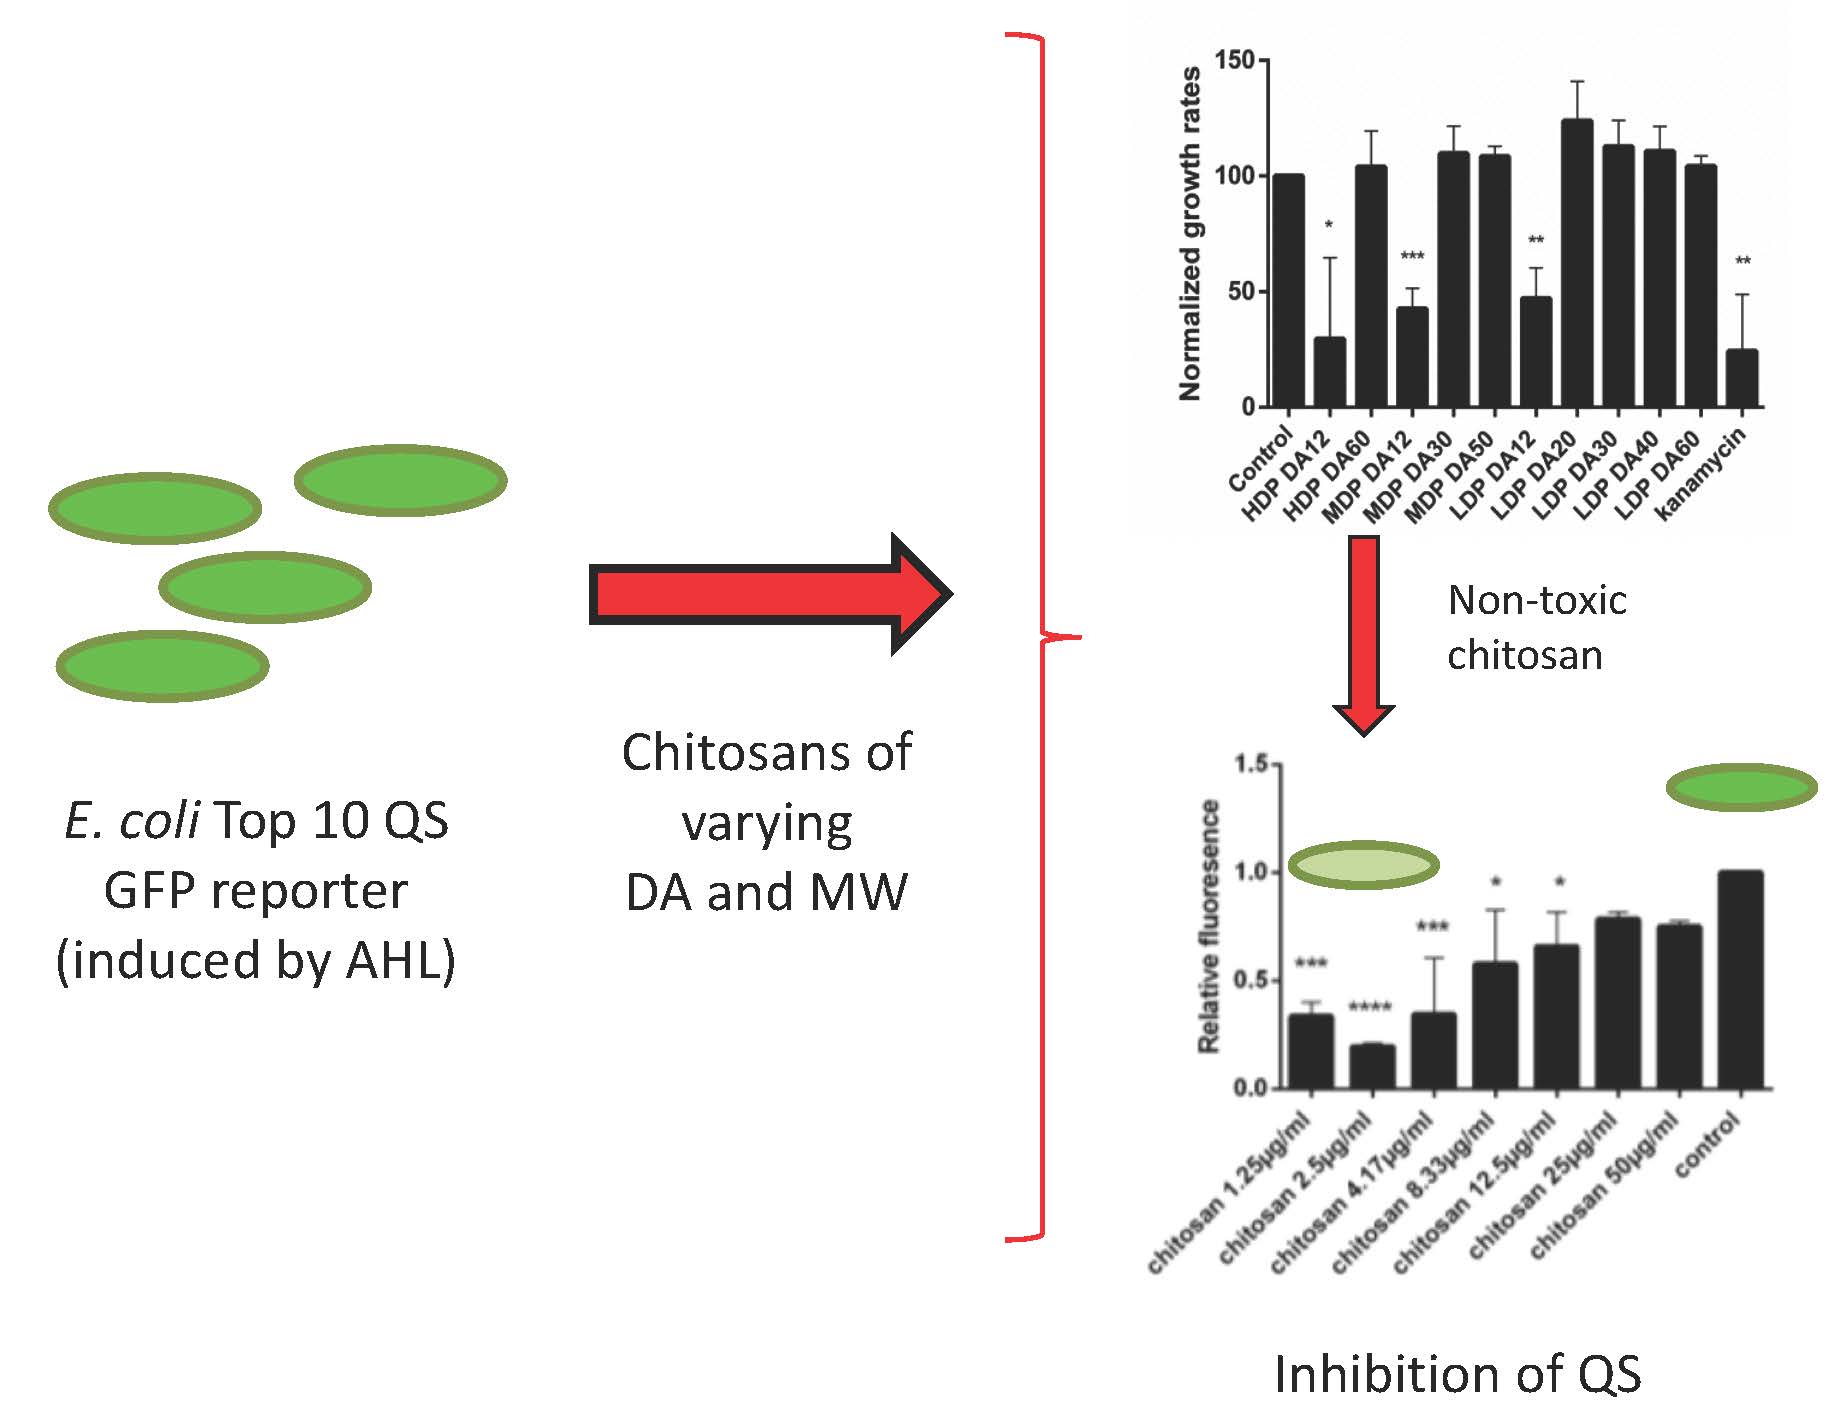 Assessment Of The Quorum Sensing Inhibition Activity Of A Non Toxic Chitosan In A Ahl Based E Coli Biosensor V1 Preprints